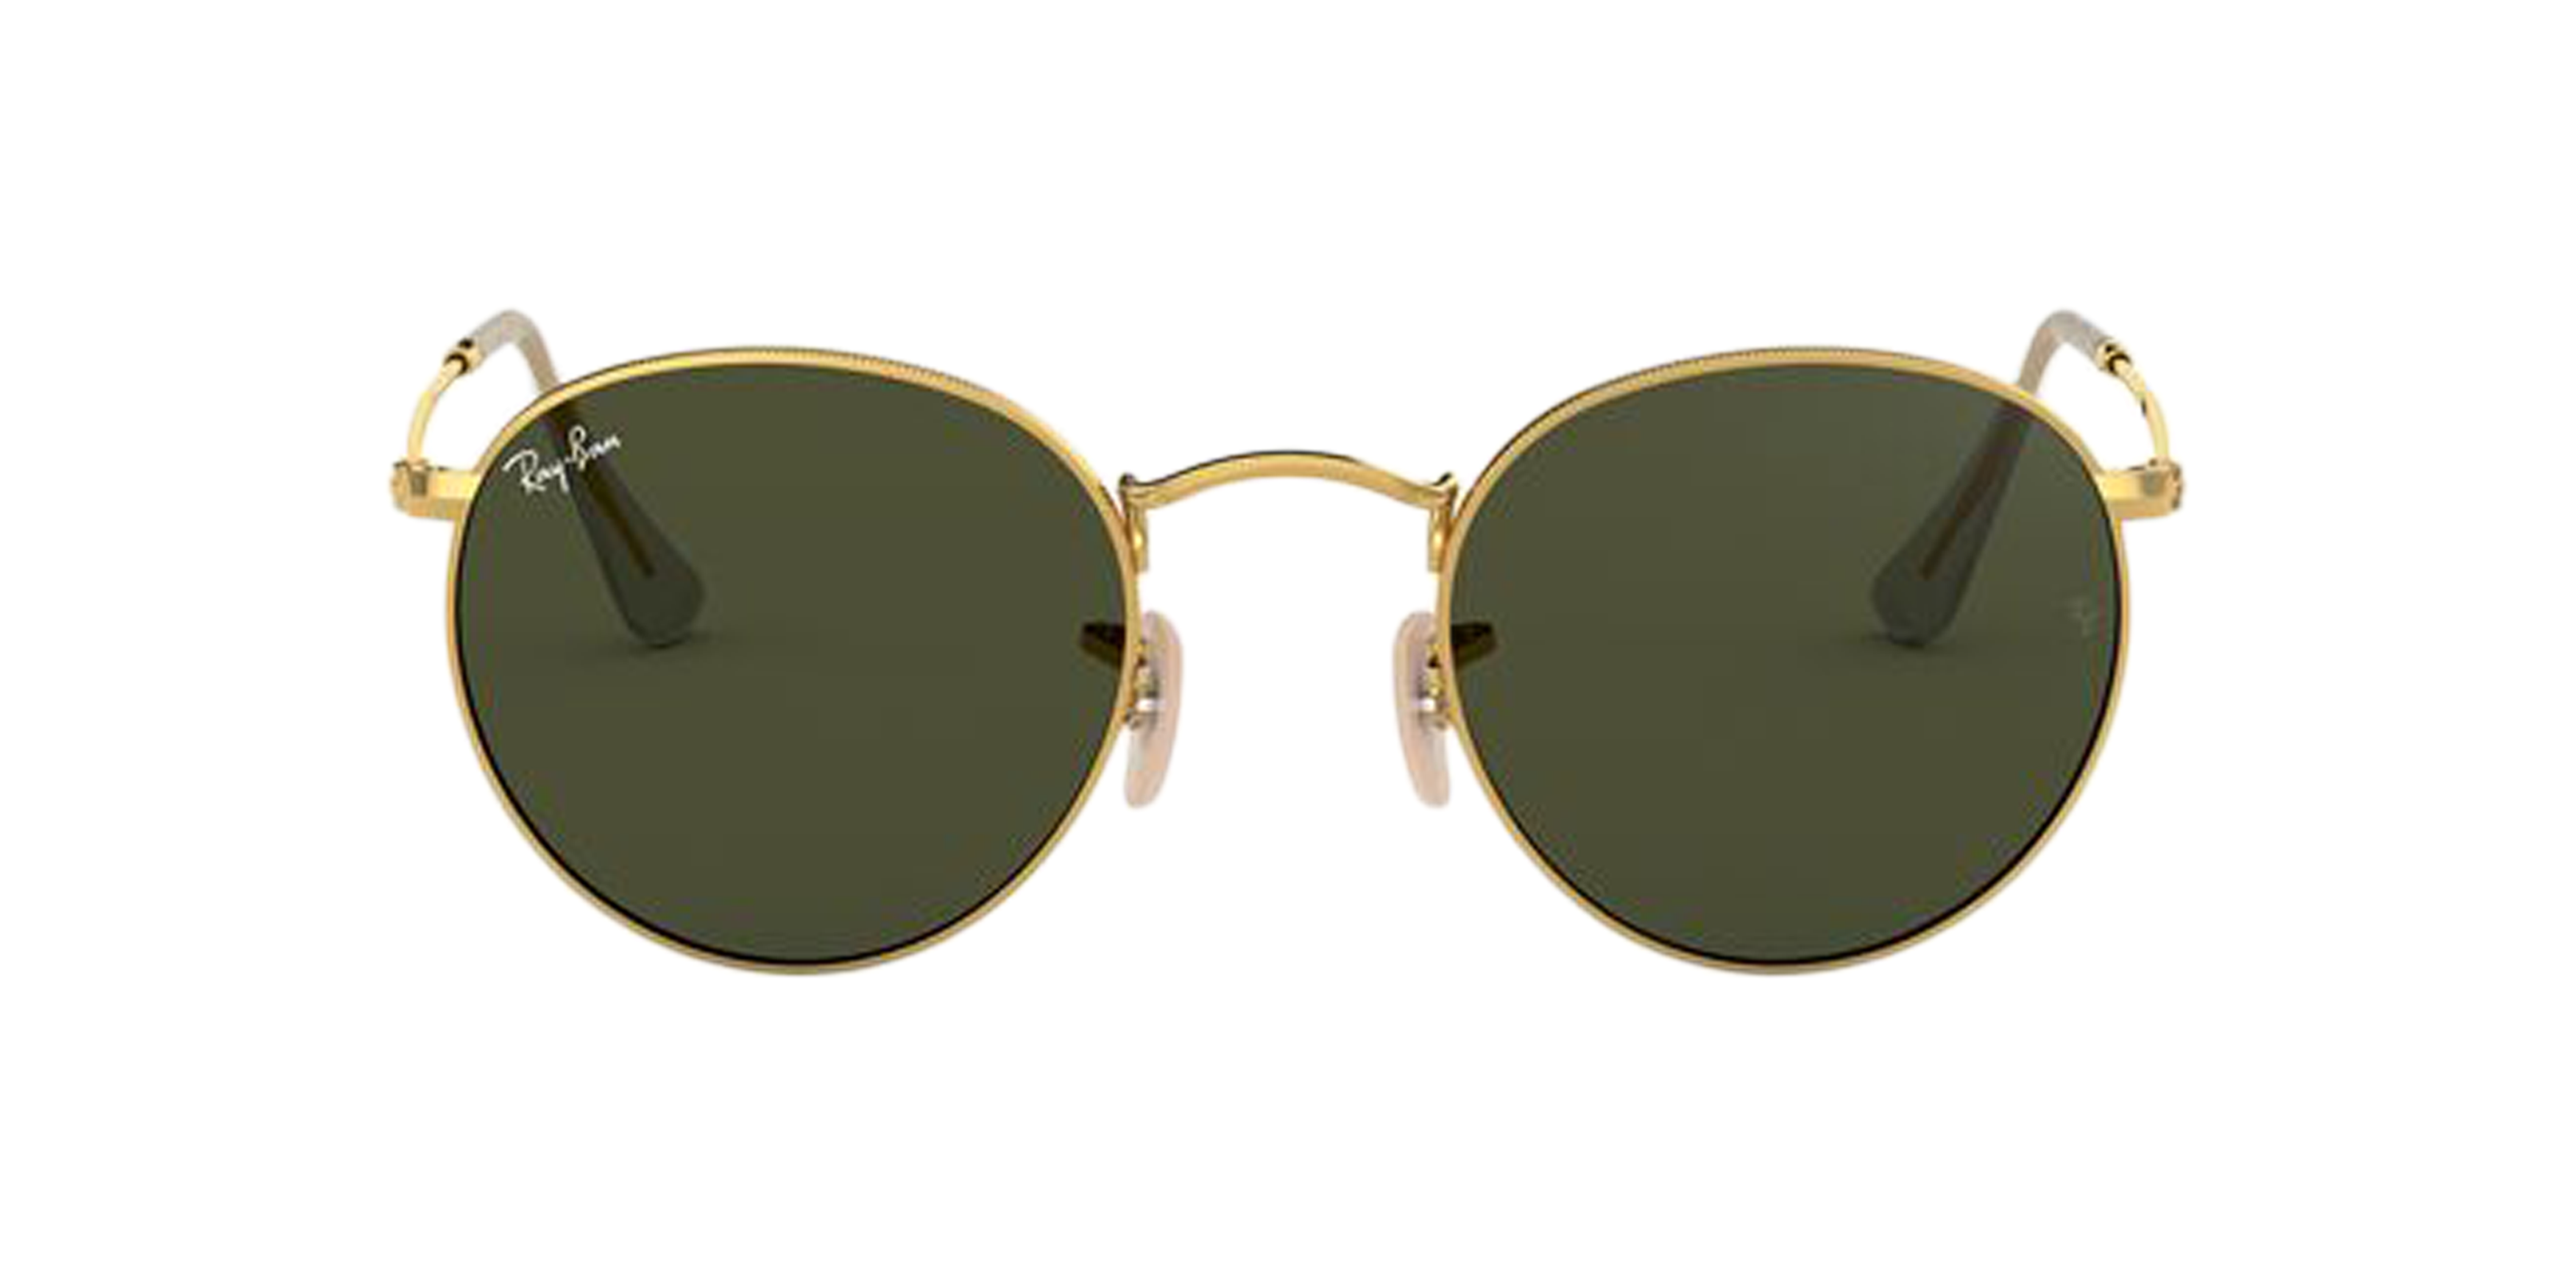 [products.image.front] RAY-BAN RB3447N 1